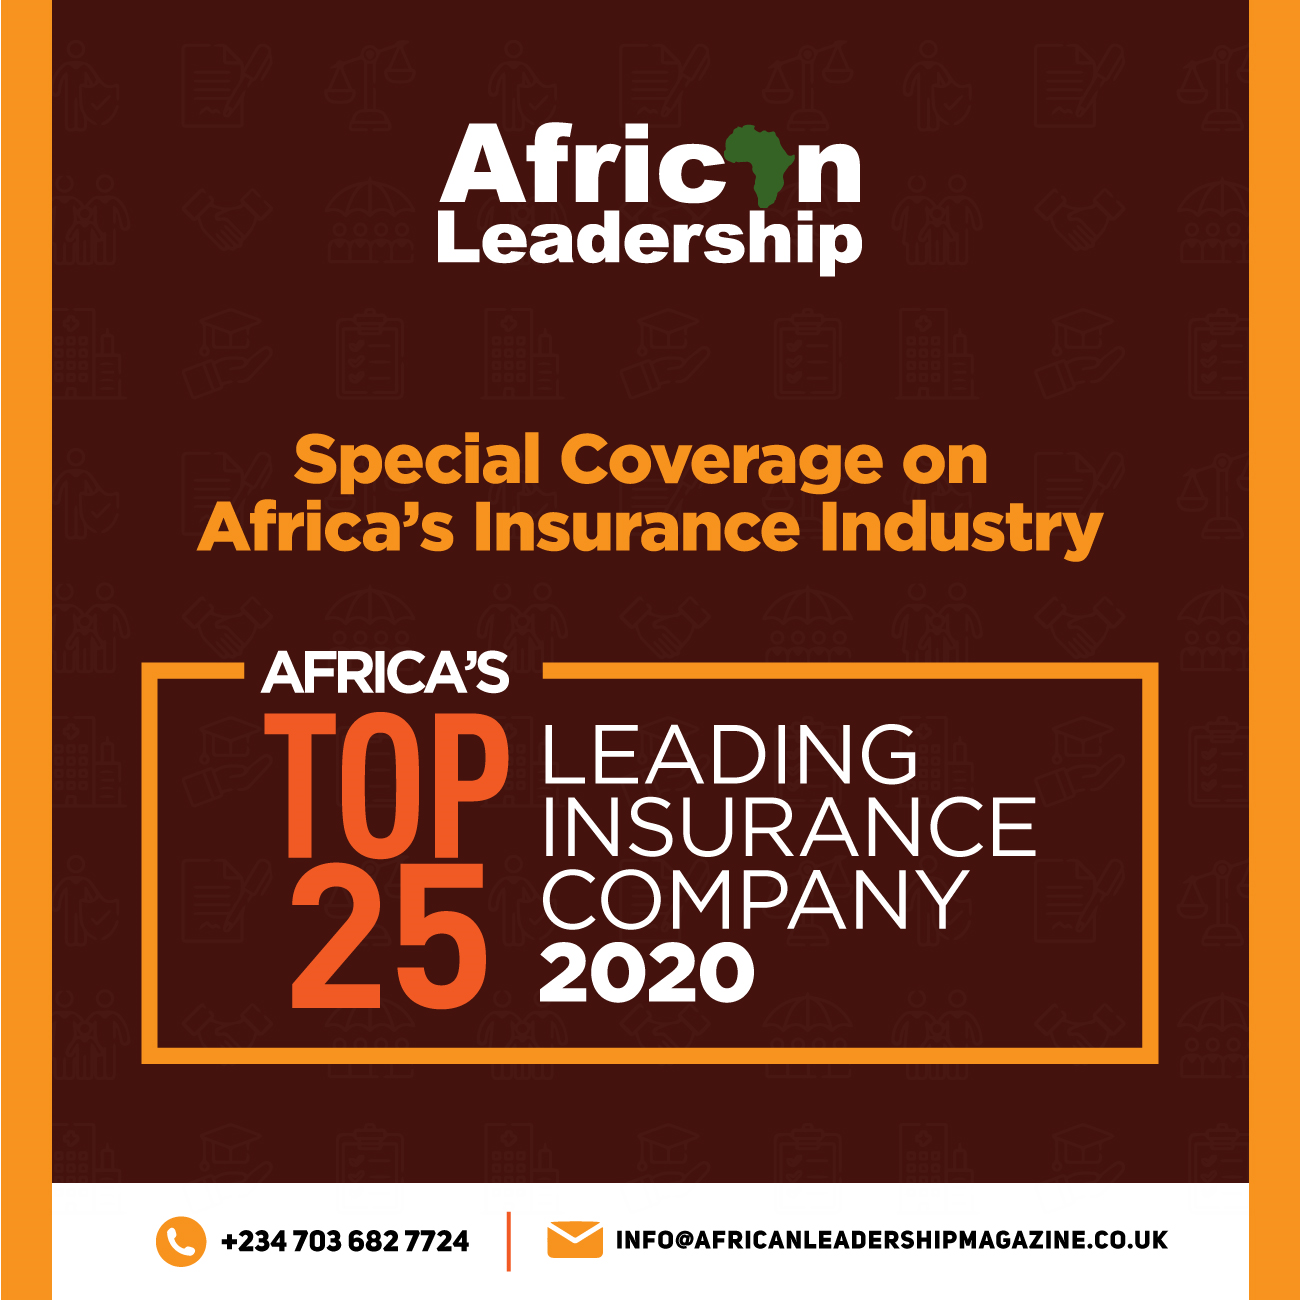 African Leadership Magazine to Publish A Special Coverage on the Continent’s Insurance Sector